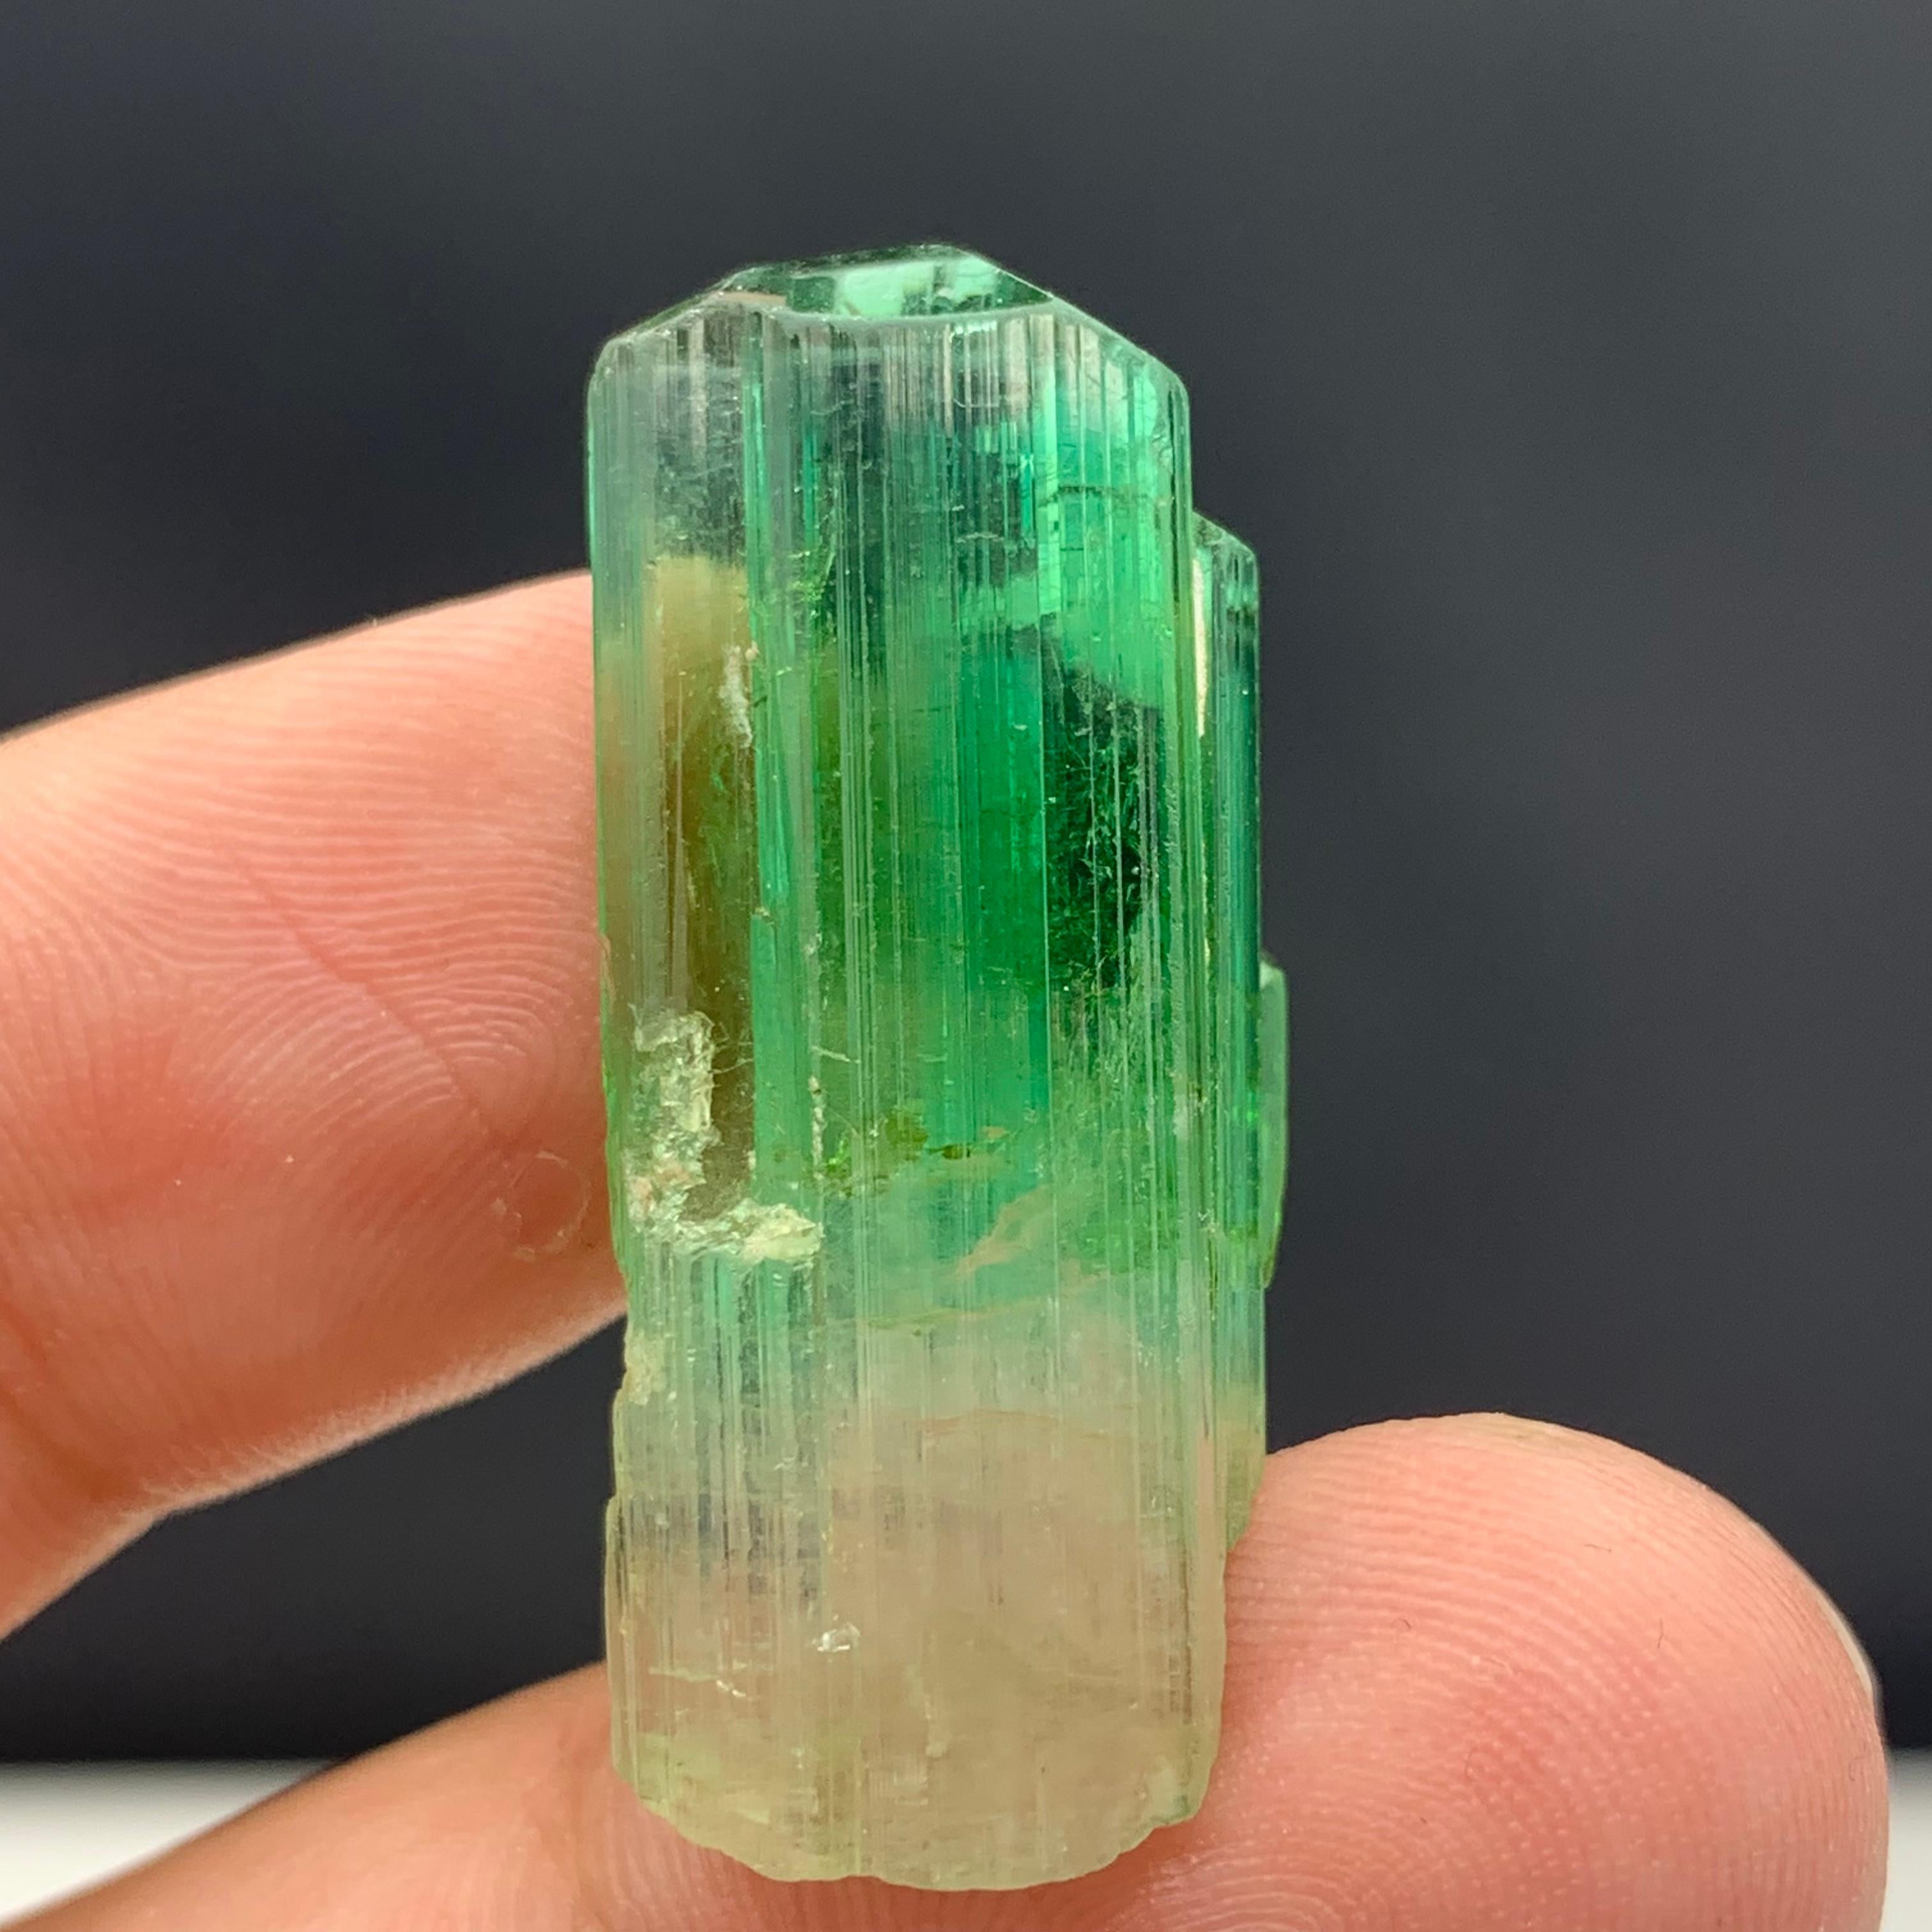 Gorgeous Bi Color Tourmaline Crystal From Afghanistan 
Weight: 38.30 Carat 
Dimension: 3.3 x 1.3 x 1.2 Cm 
Origin: Afghanistan 

Tourmaline is a crystalline silicate mineral group in which boron is compounded with elements such as aluminium, iron,